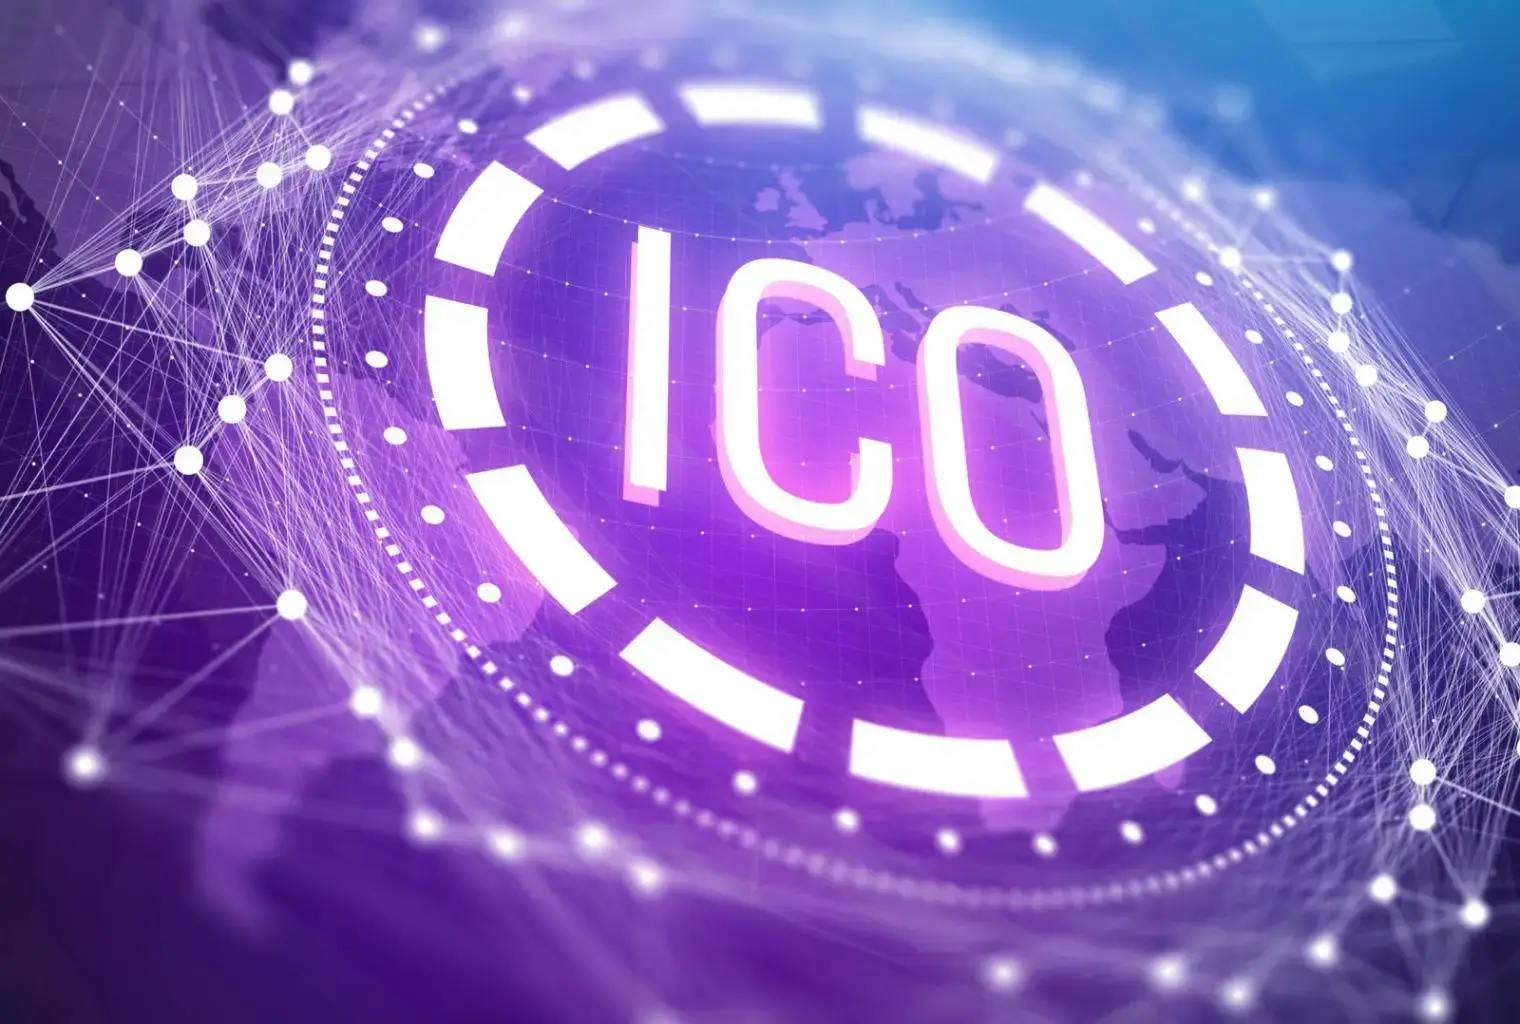 ICO (Initial Coin Offering)